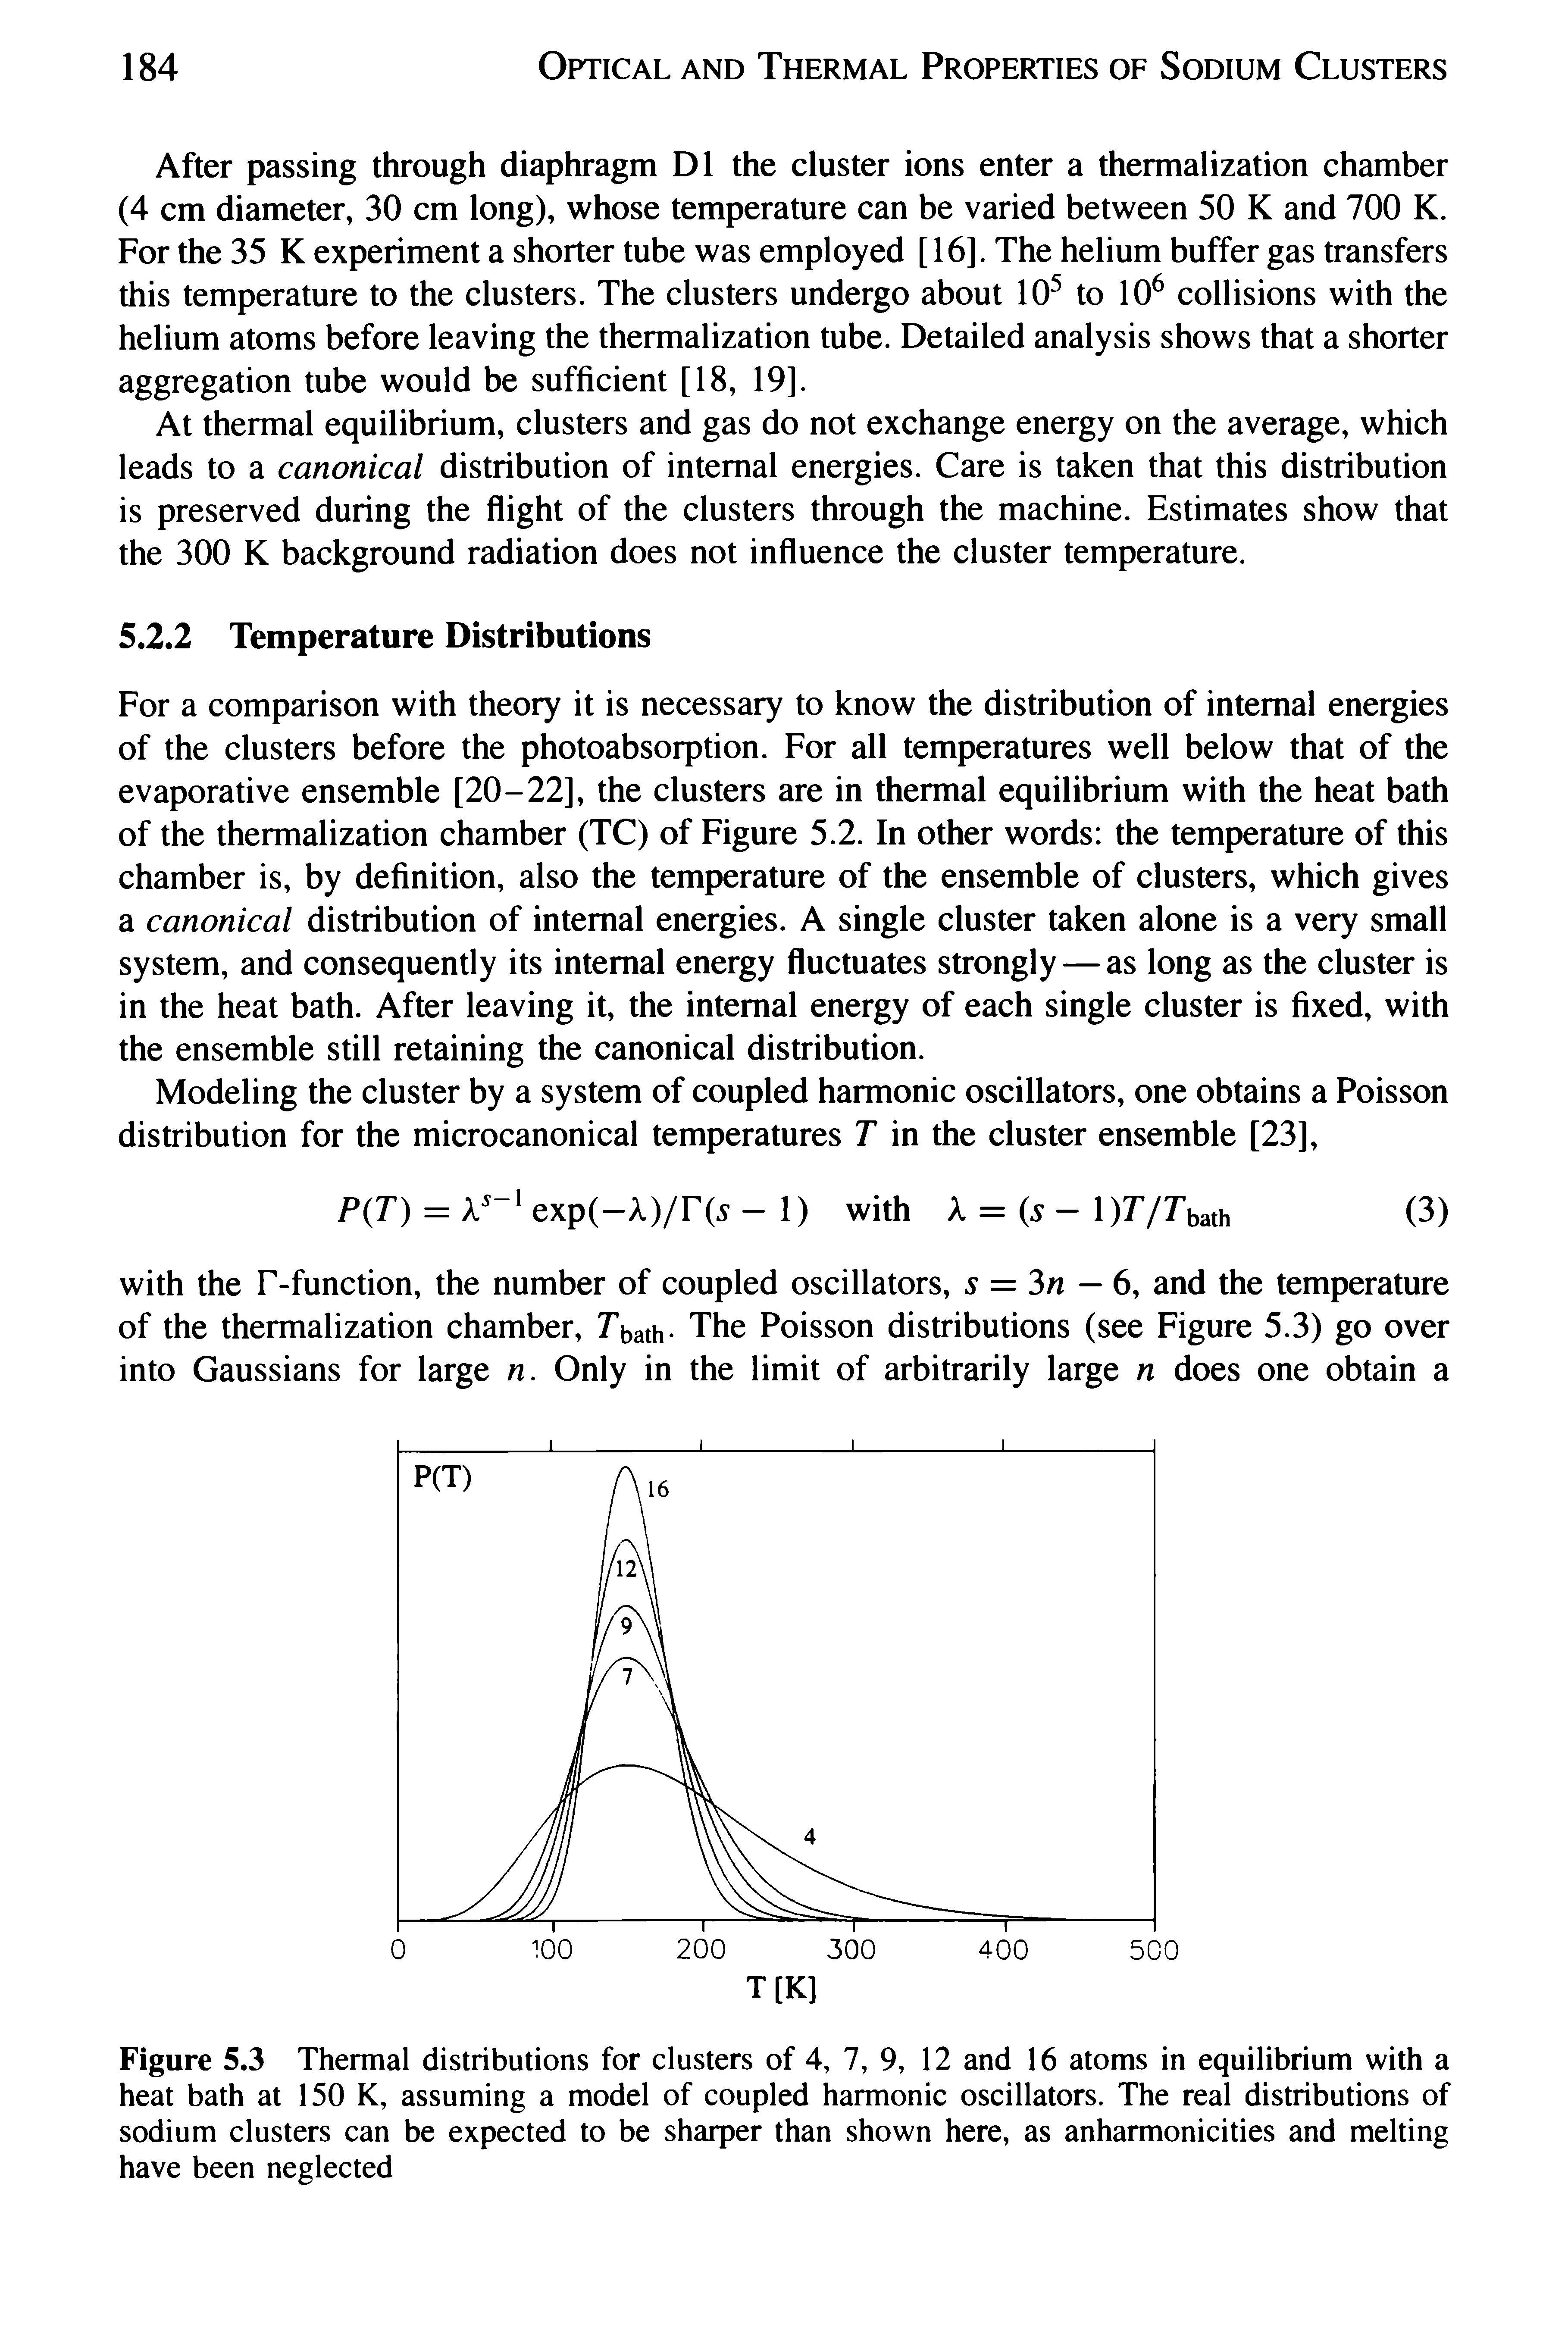 Figure 5.3 Thermal distributions for clusters of 4, 7, 9, 12 and 16 atoms in equilibrium with a heat bath at 150 K, assuming a model of coupled harmonic oscillators. The real distributions of sodium clusters can be expected to be sharper than shown here, as anharmonicities and melting have been neglected...